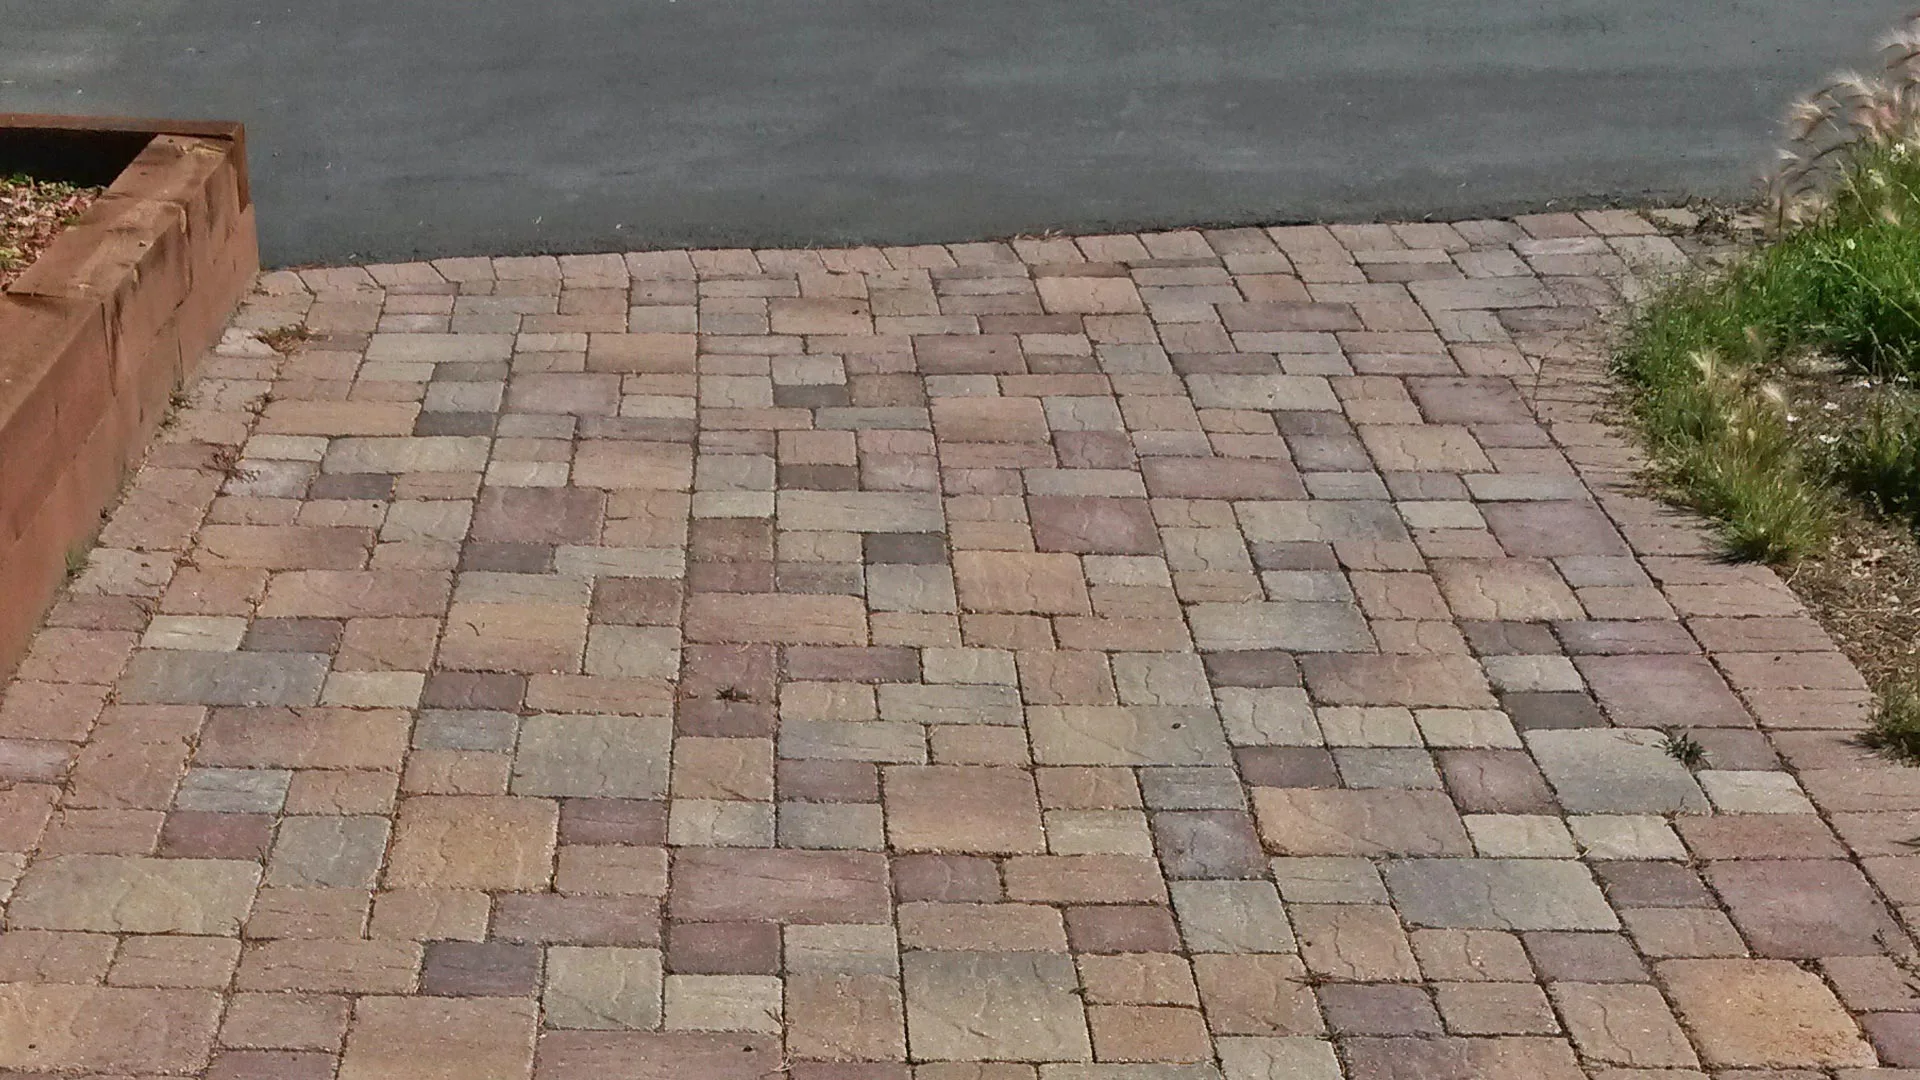 Brick paver driveway installed at a home in Winter Park.